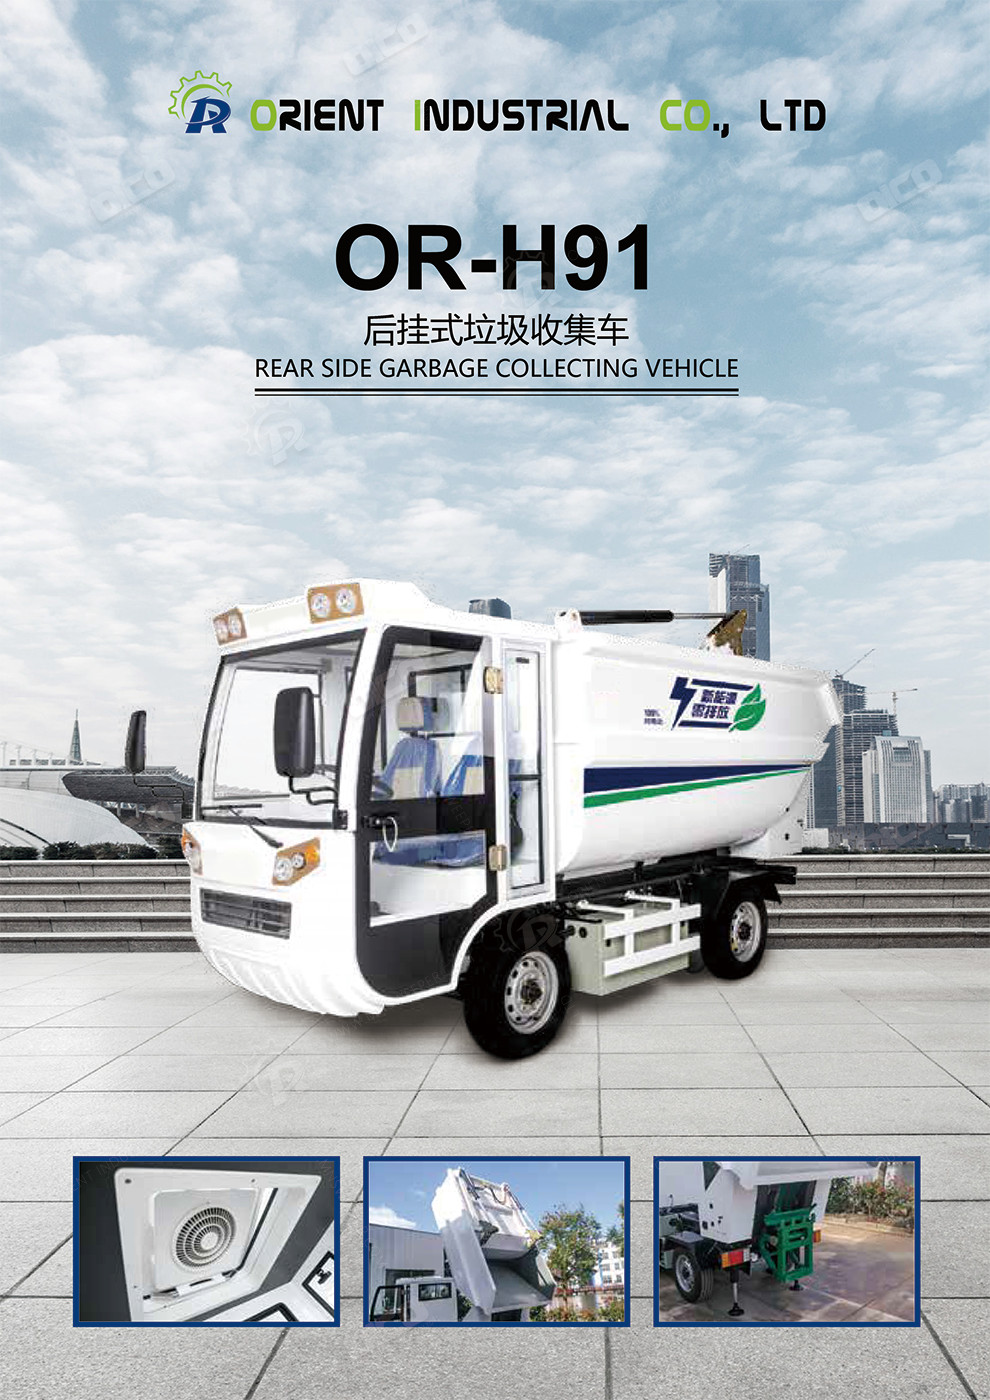 OR-H91 Rear Side Garbage Collecting Vehicle